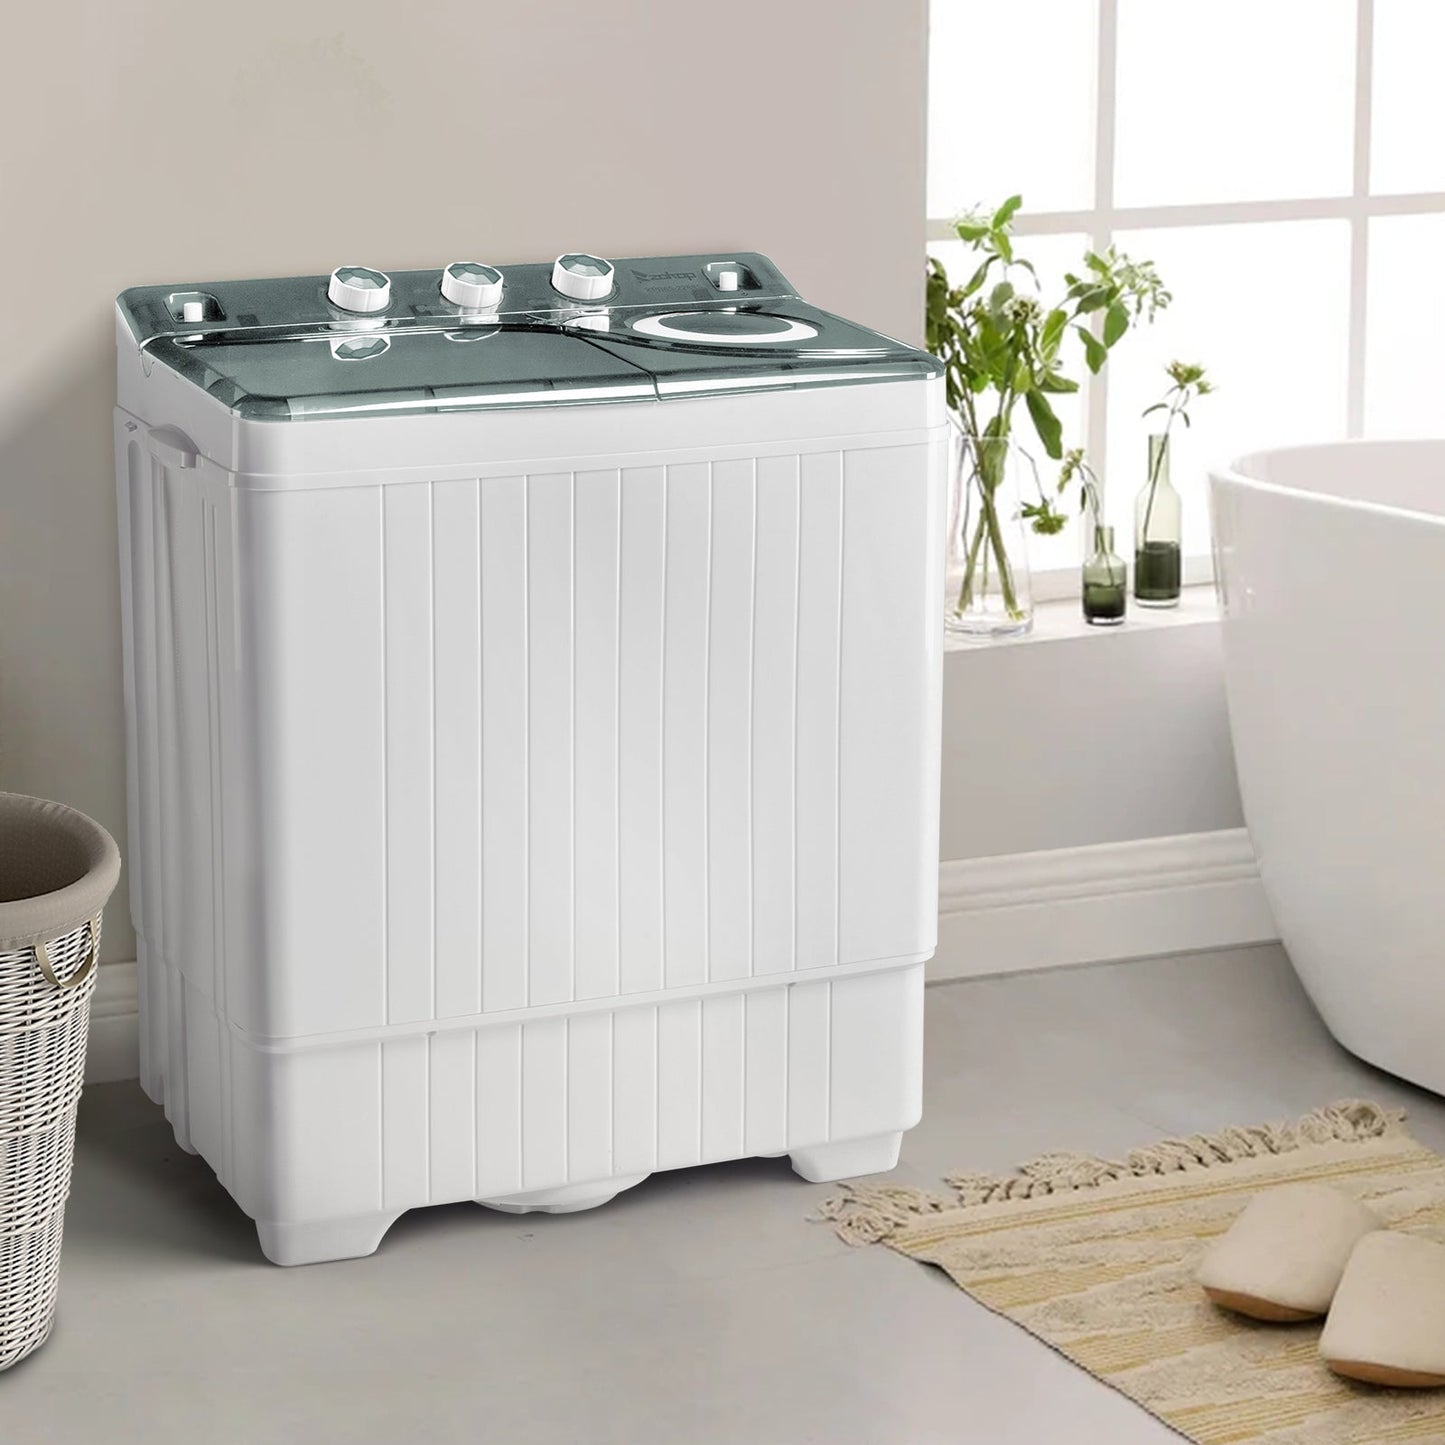 Twin Tub with Built-in Drain Pump XPB65-2288S 26Lbs Semi-automatic Twin Tube Washing Machine for Apartment, White & Grey